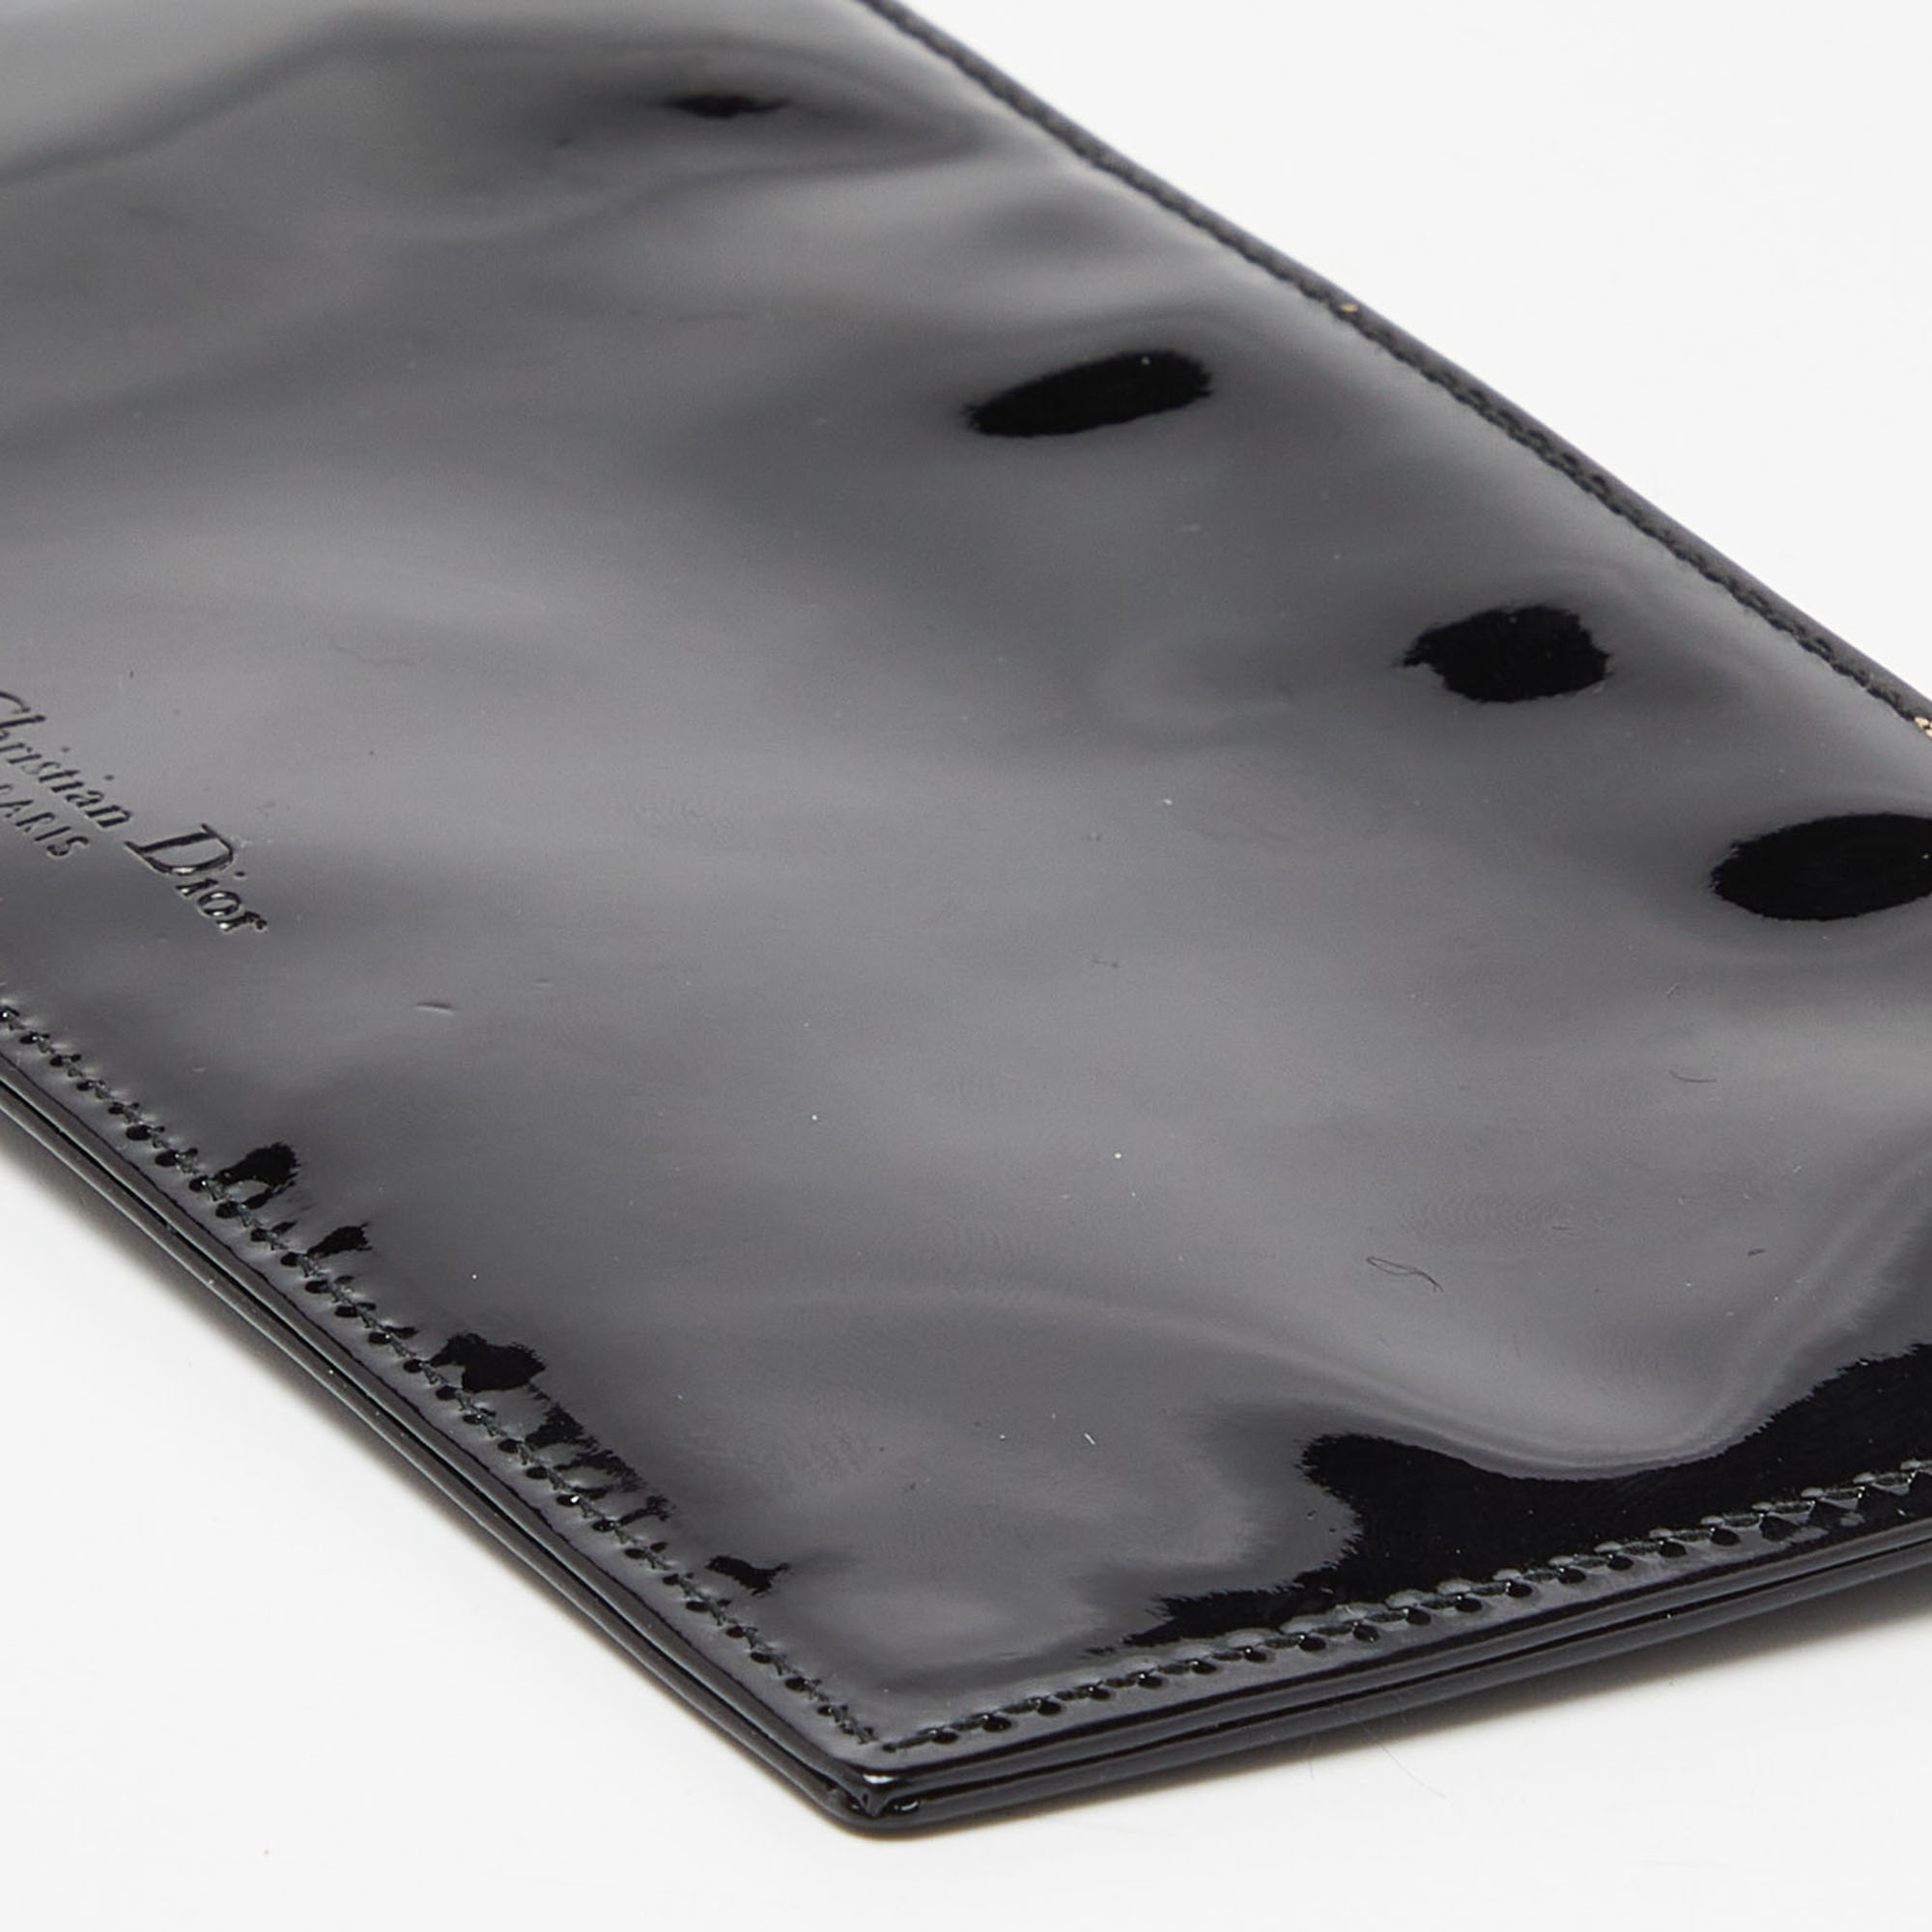 Dior Black Patent Leather Zip Pouch